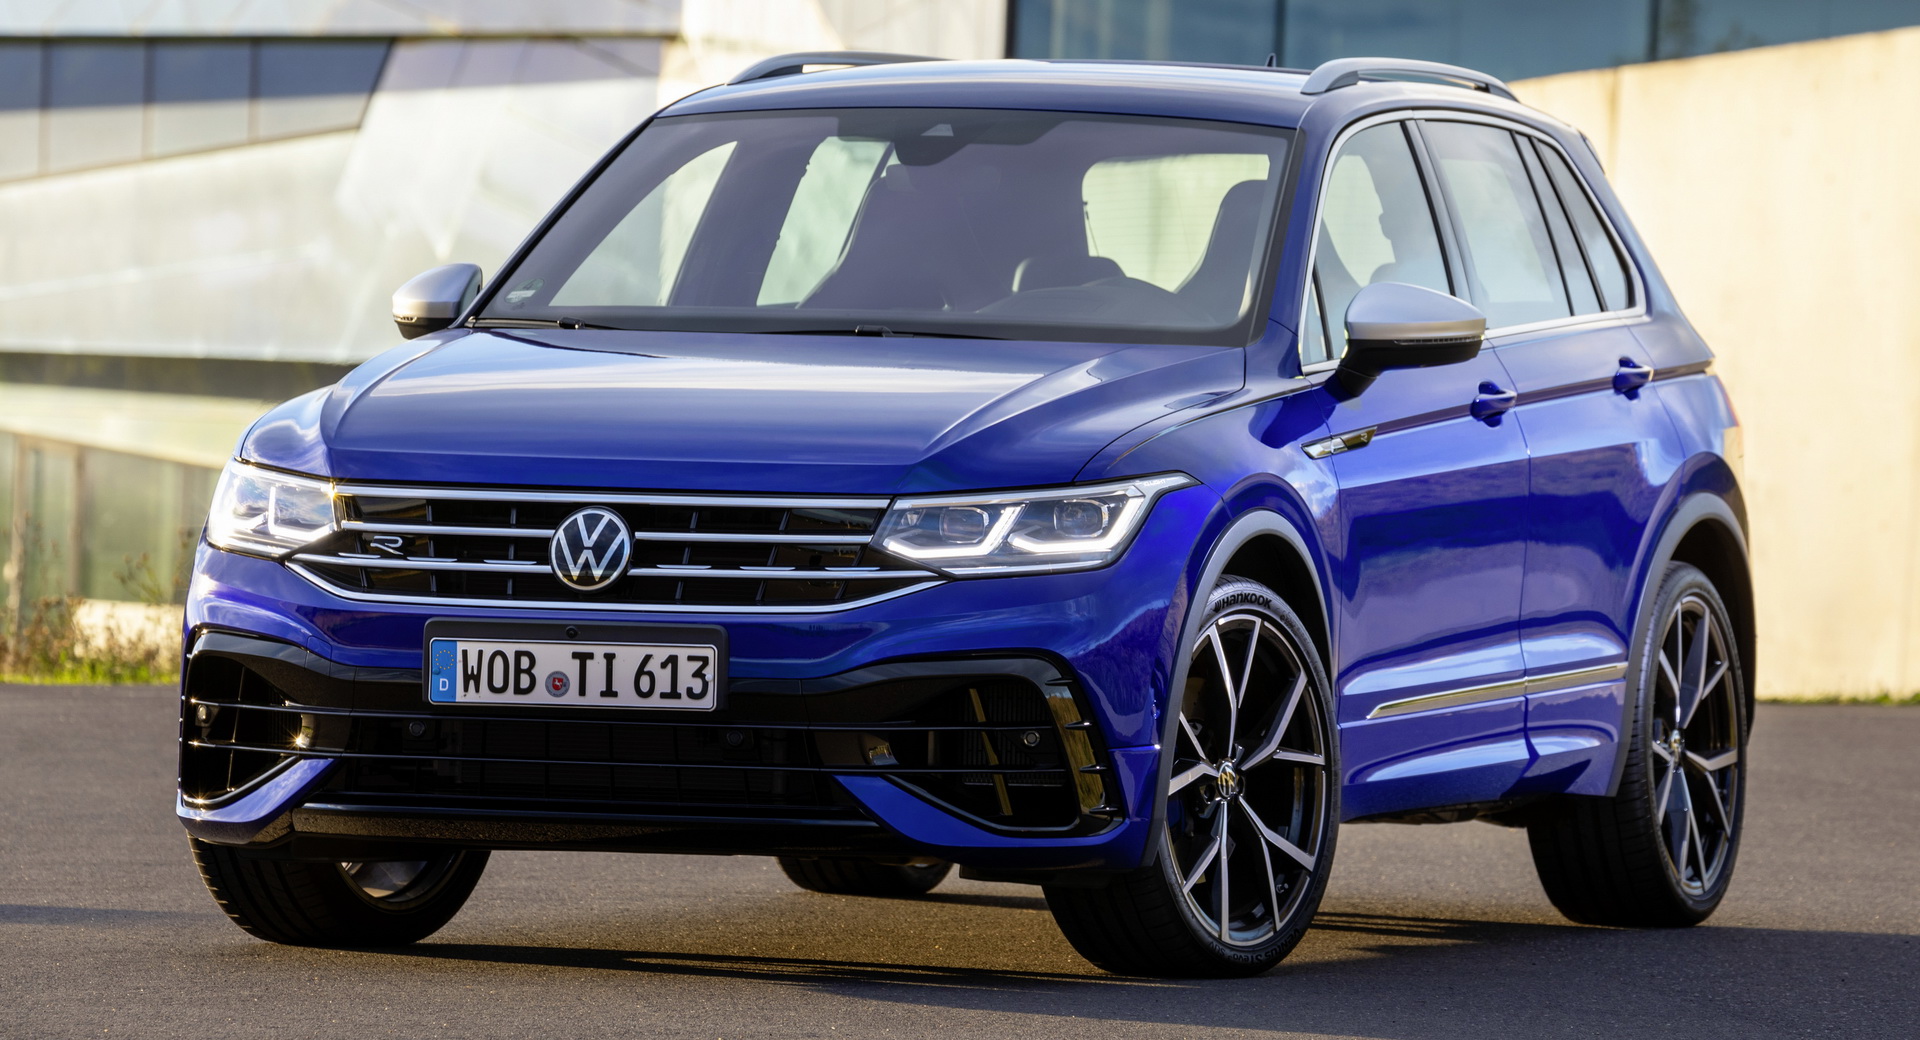 2021 VW Tiguan R 316 HP Performance SUV Launched In The